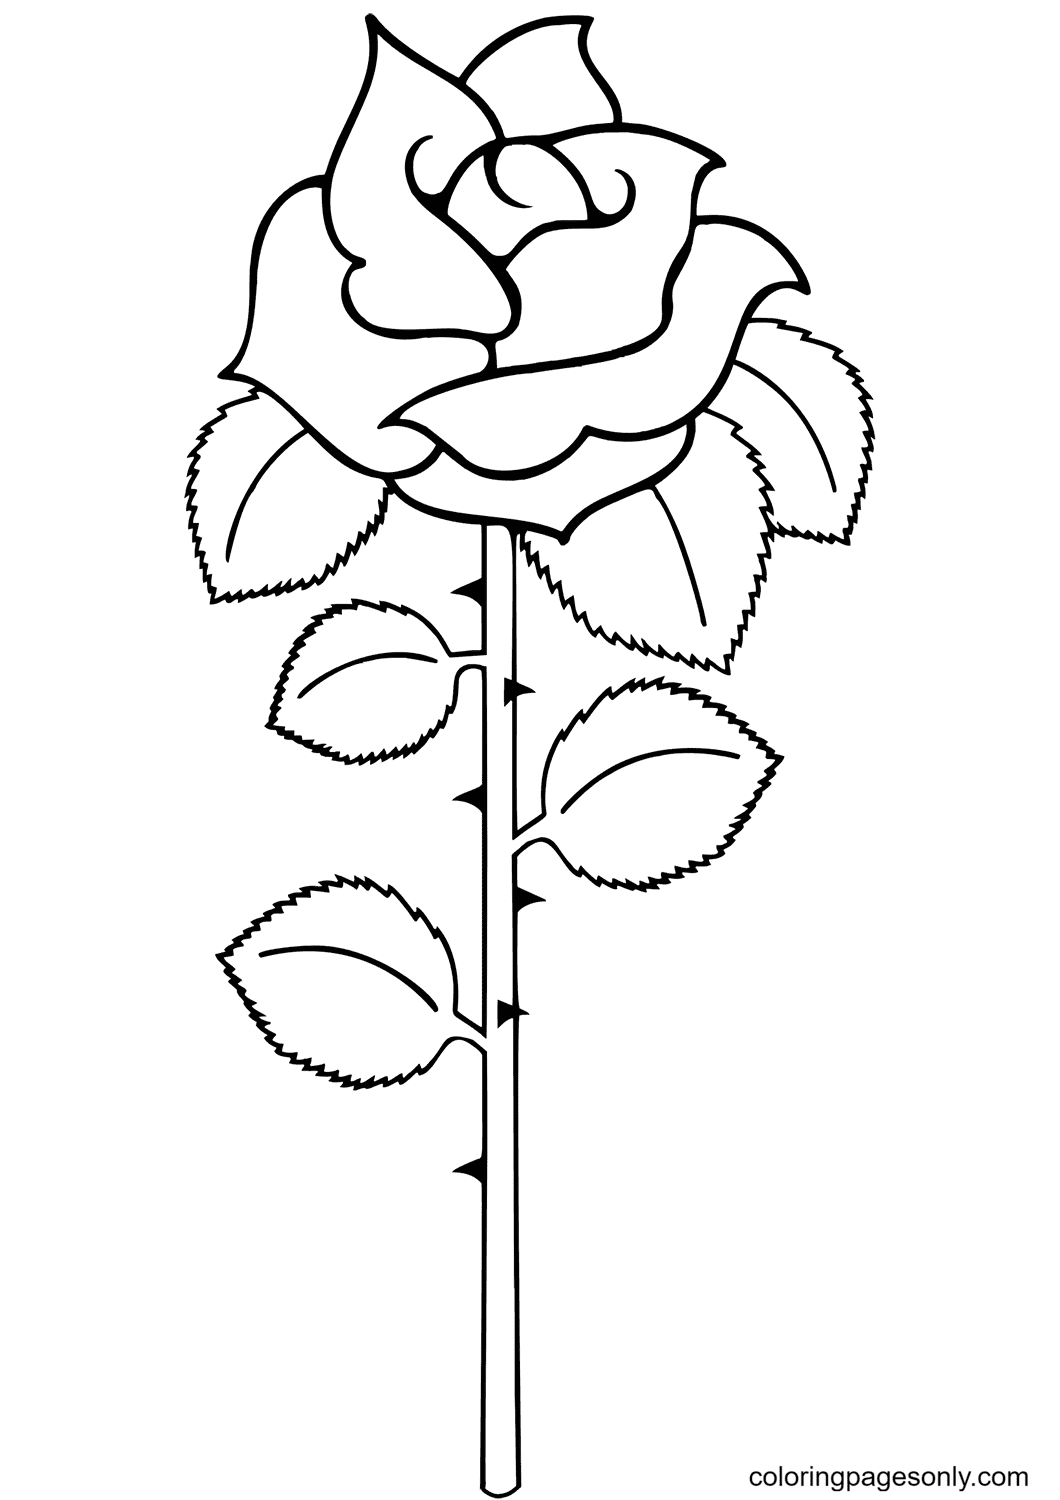 Simple Rose with Leaves Coloring Page